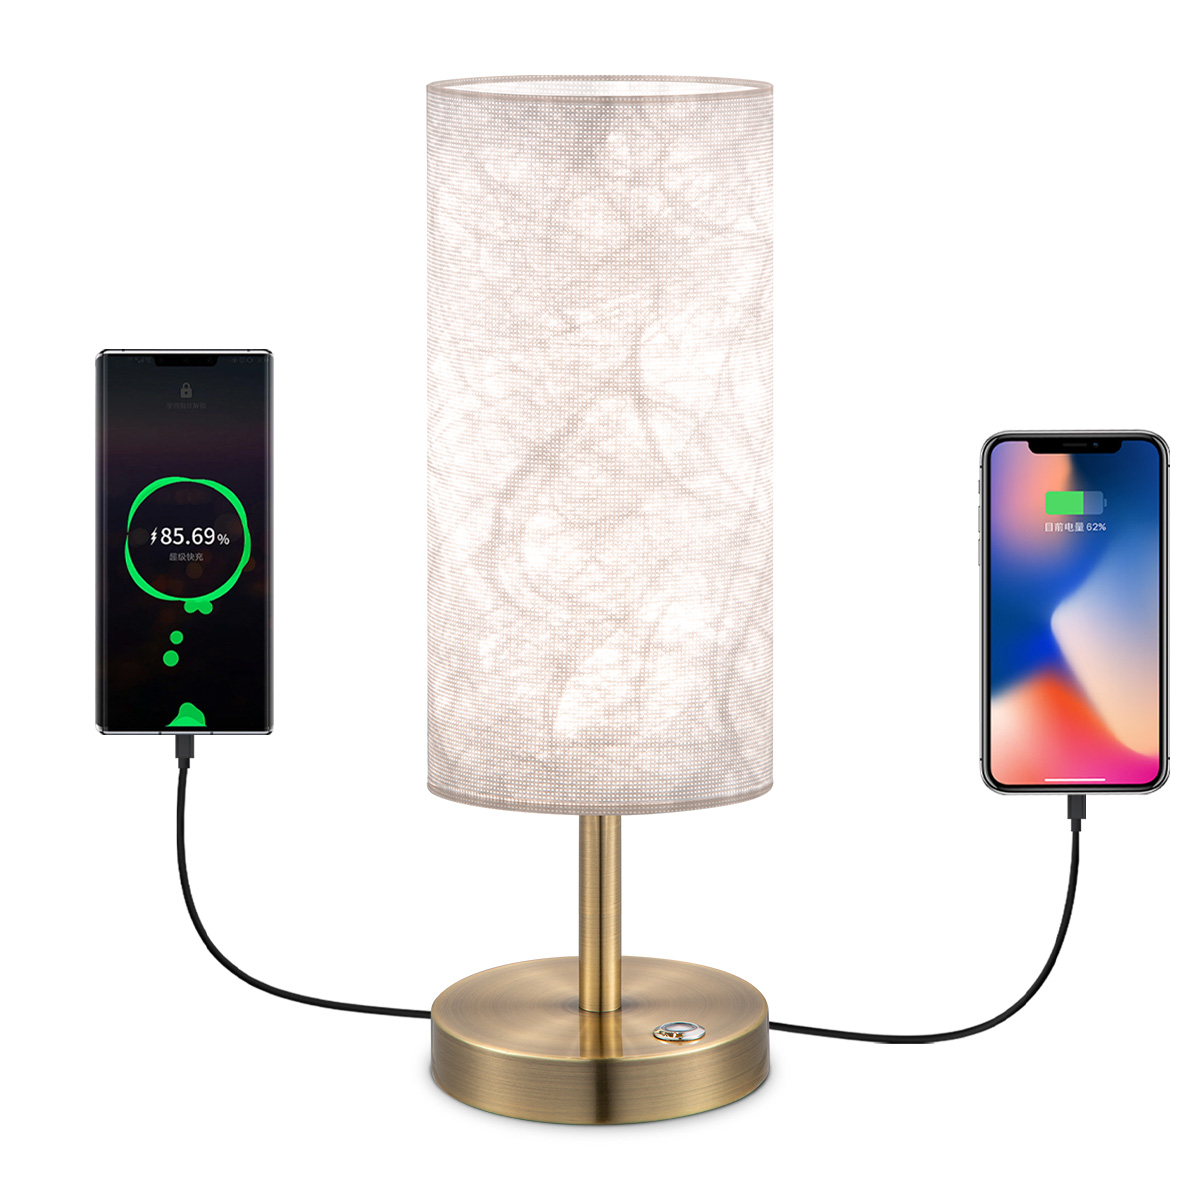 Tangla lighting - TLT7640-01BW - LED table lamp 1 Light - metal and fabric in white and brass - rechargeable - USB type A and C  - E27